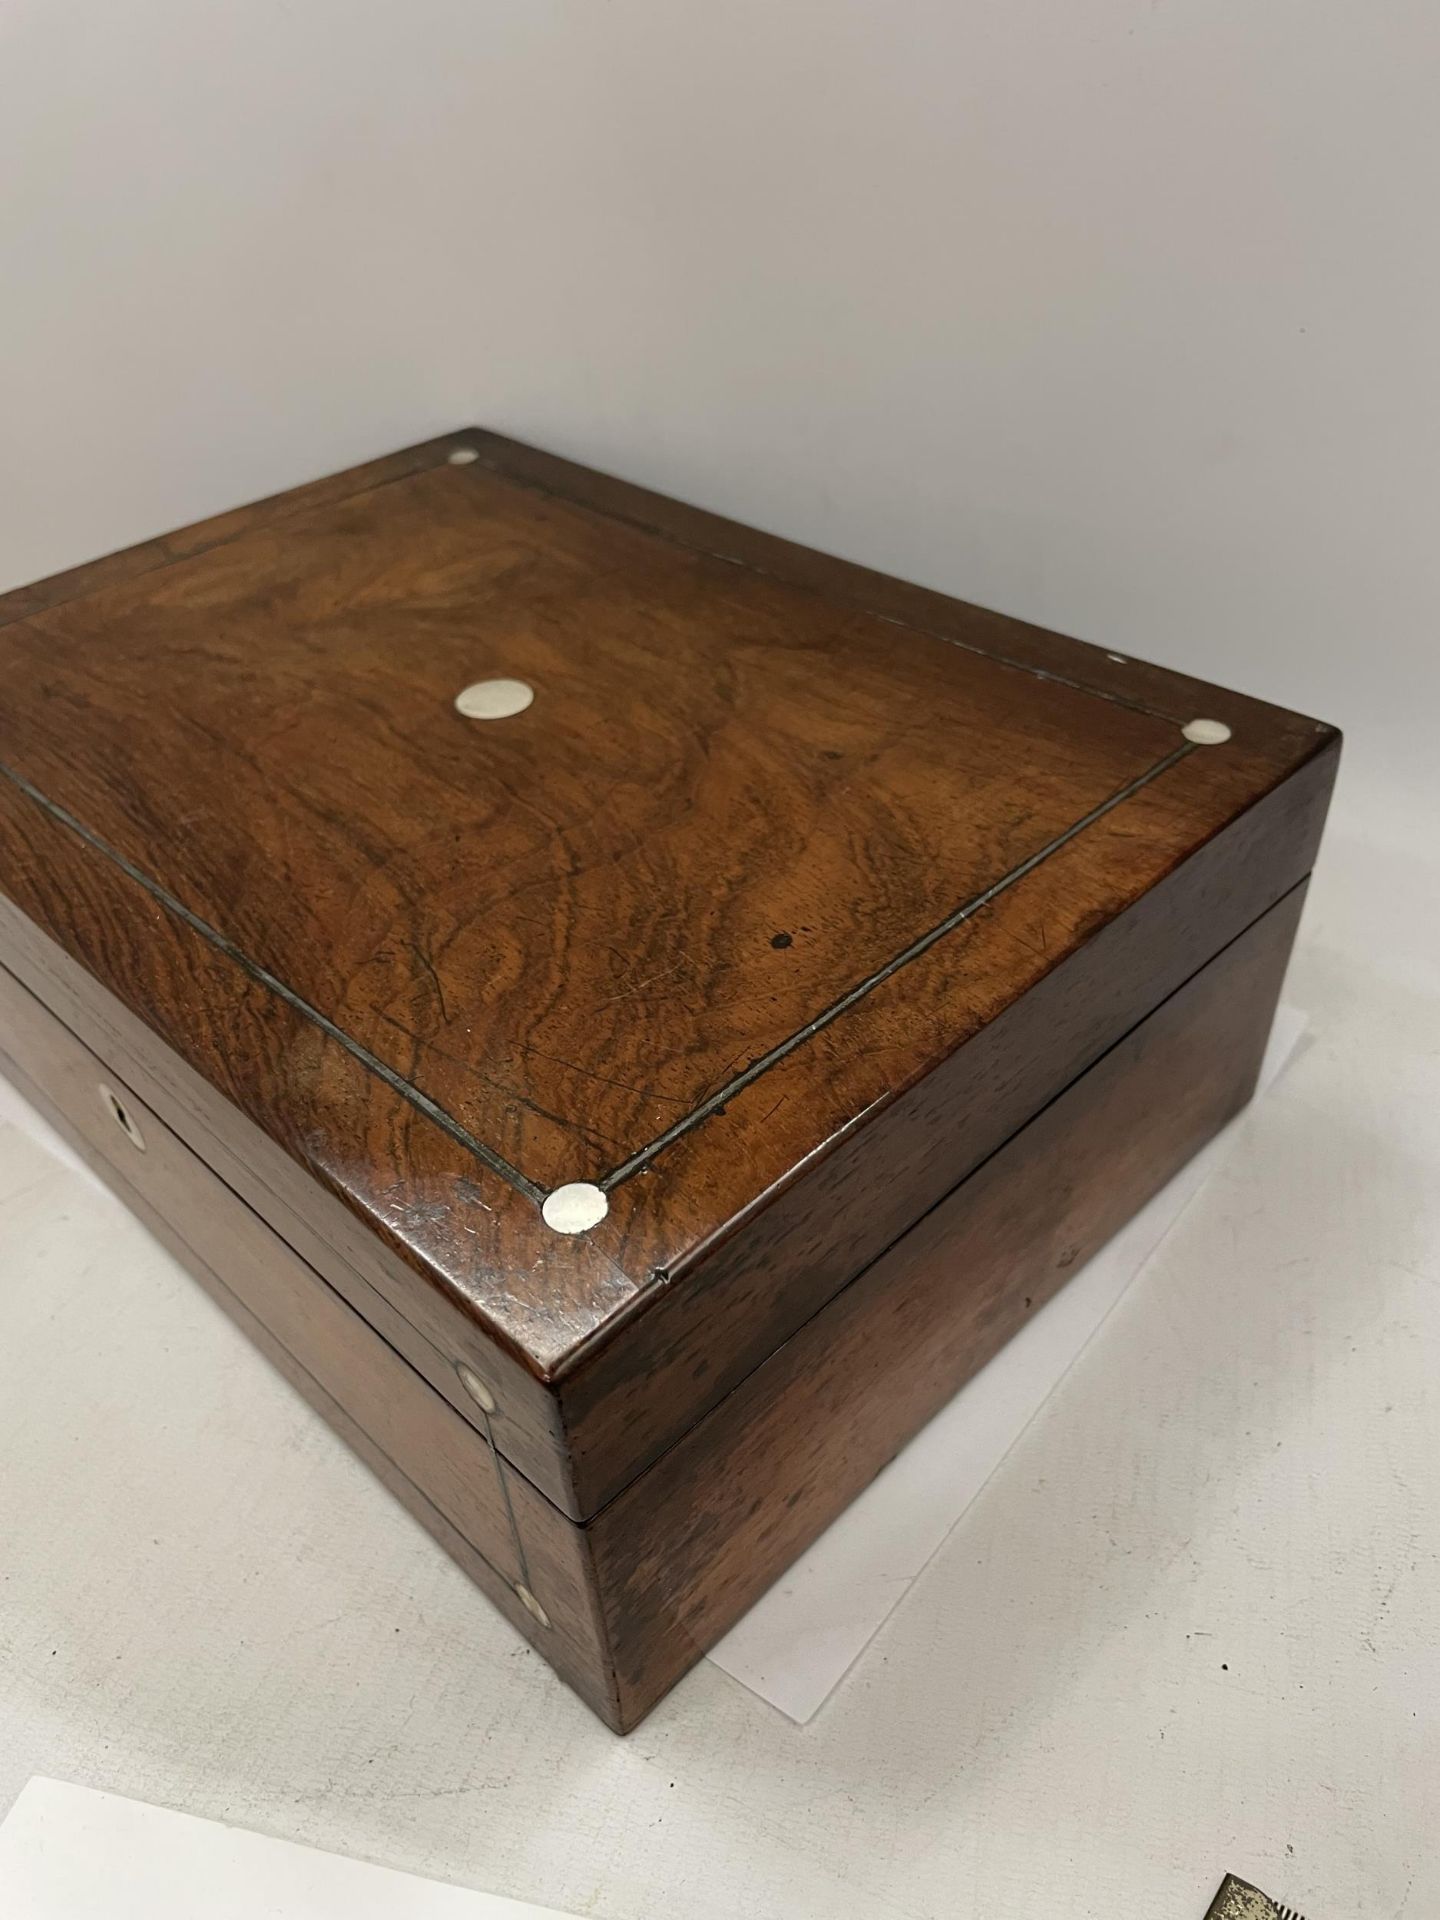 AN ANTIQUE ROSEWOOD JEWELLERY BOX WITH MOTHER OF PEARL INLAY - Image 2 of 3